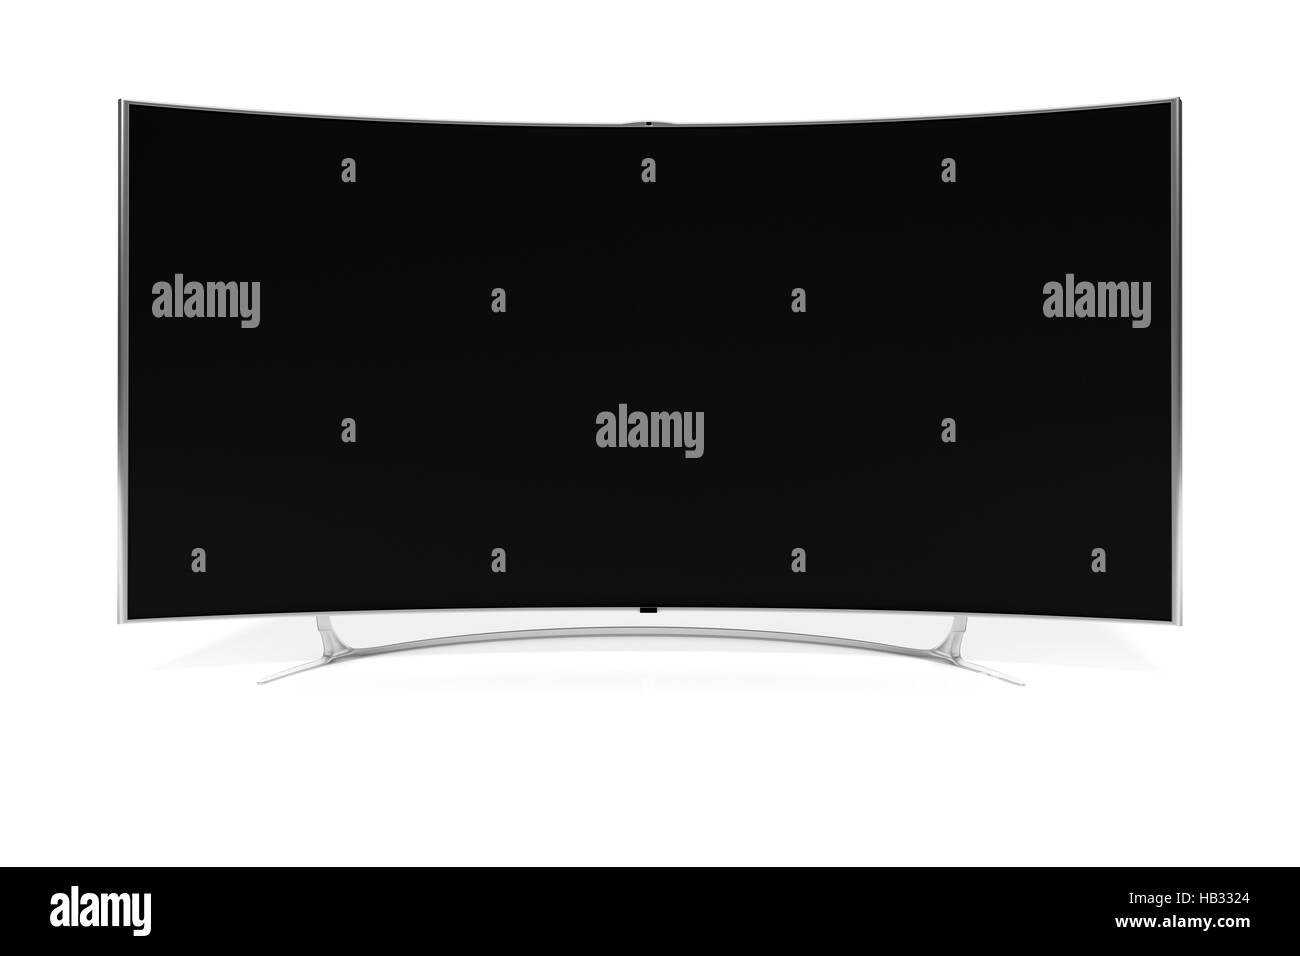 curved widescreen television Stock Photo